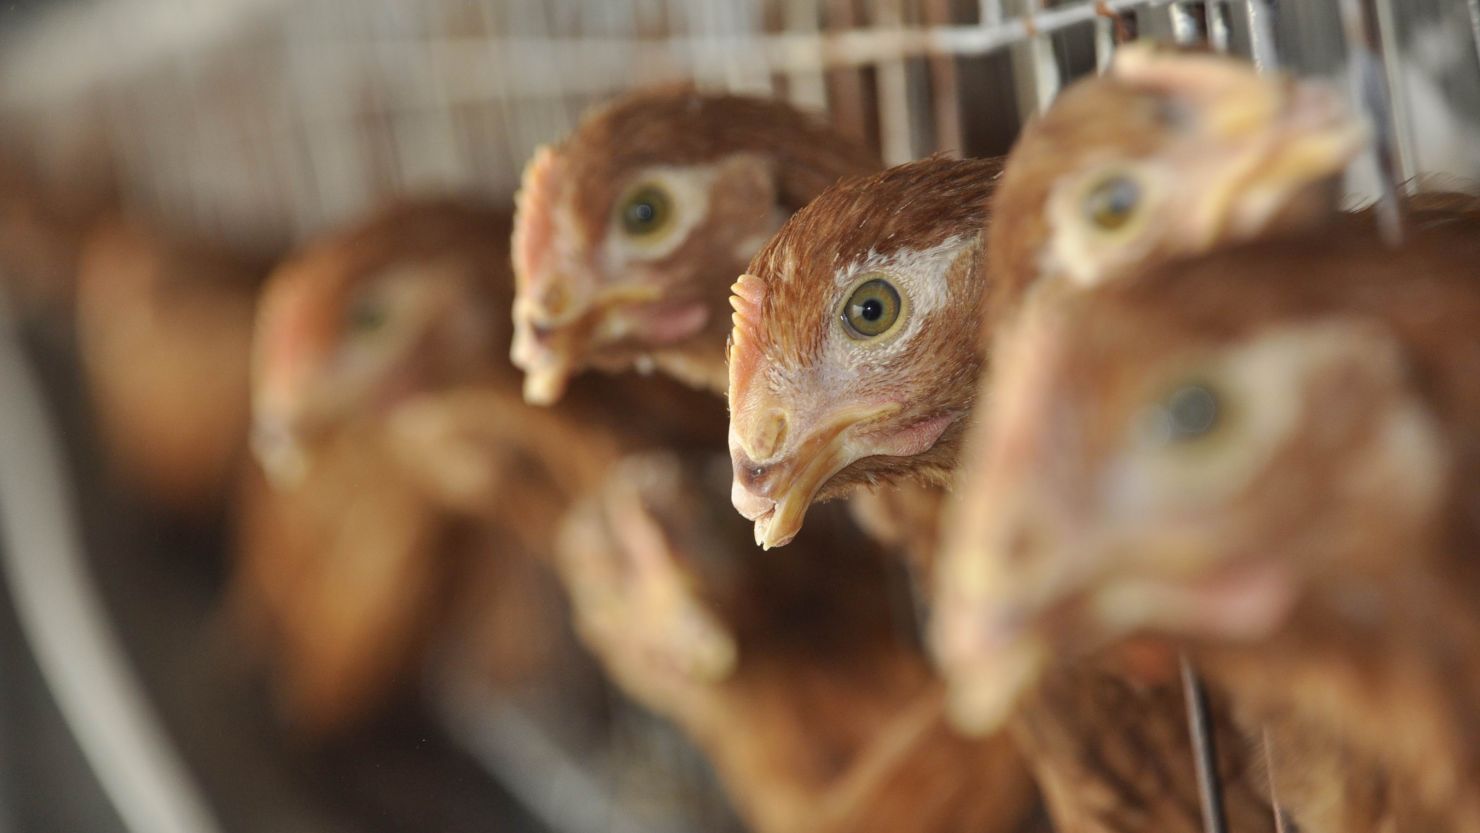 Chickens are seen at a poultry farm in China. 